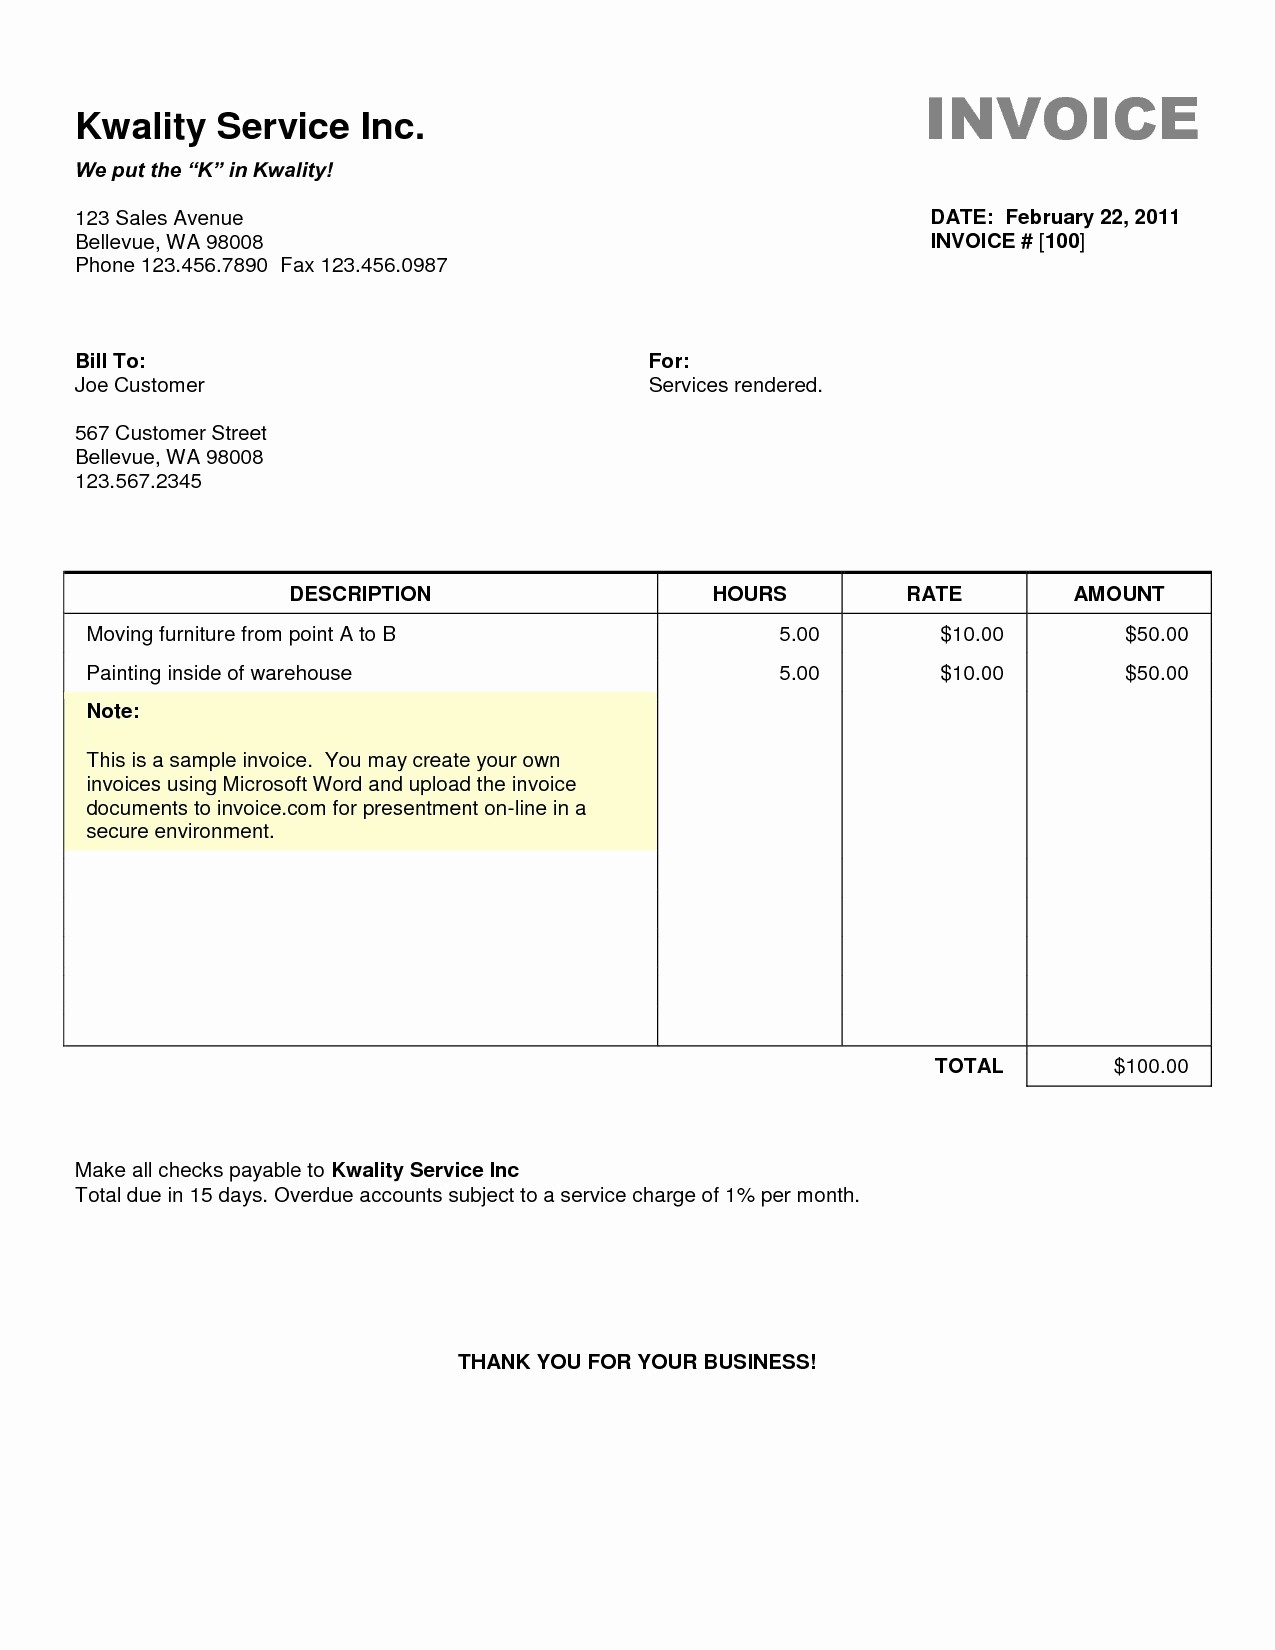 Invoice Template for Microsoft Word Inspirational Microsoft Word 2007 Invoice Template Invoice Template Ideas